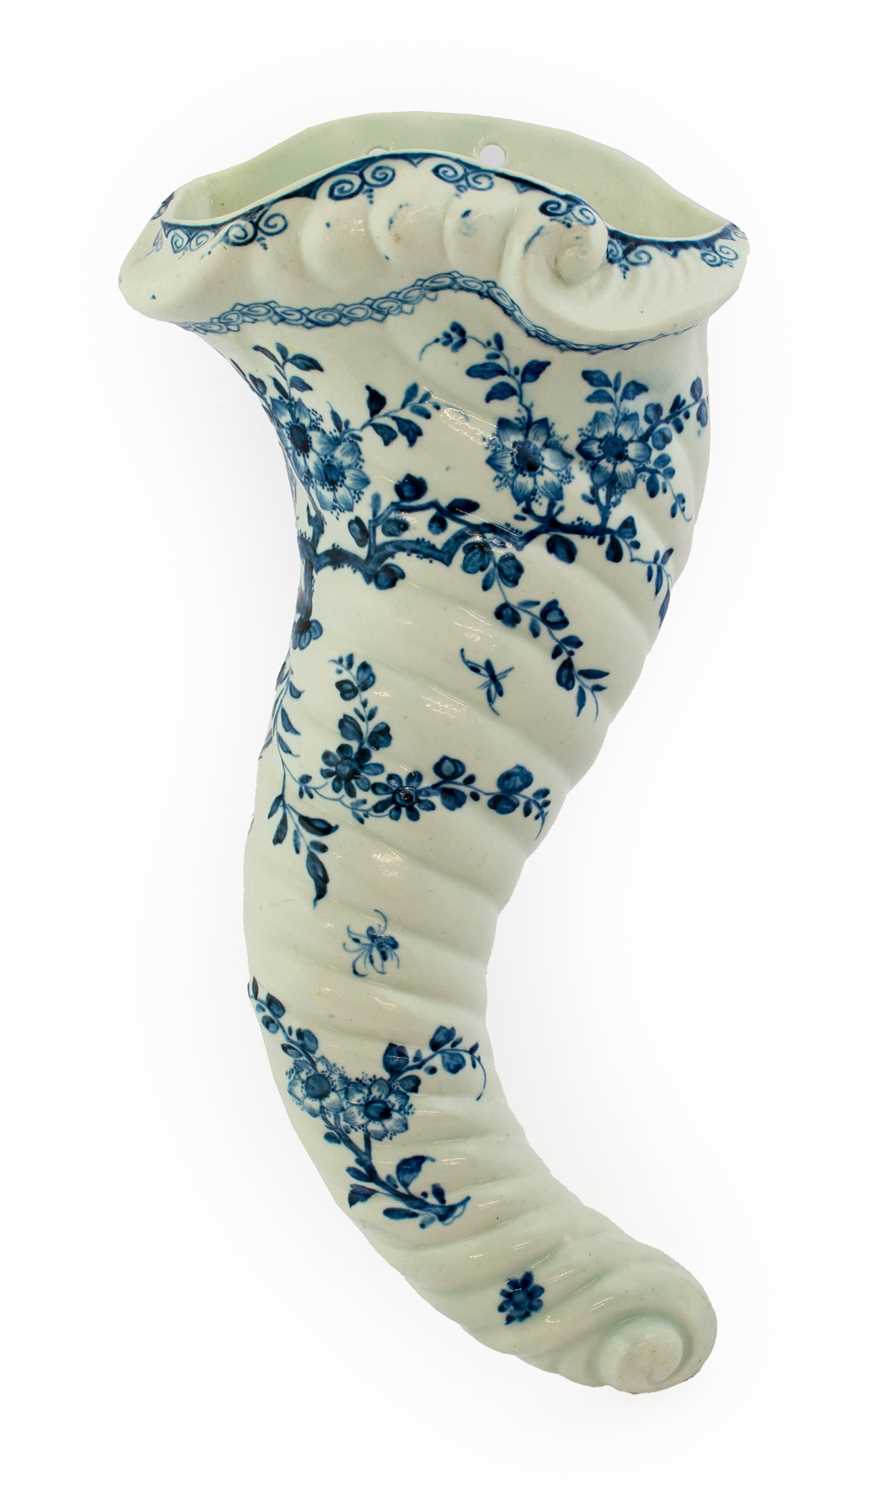 A Worcester Porcelain Cornucopia Wall Pocket, circa 1756, painted in underglaze blue with the